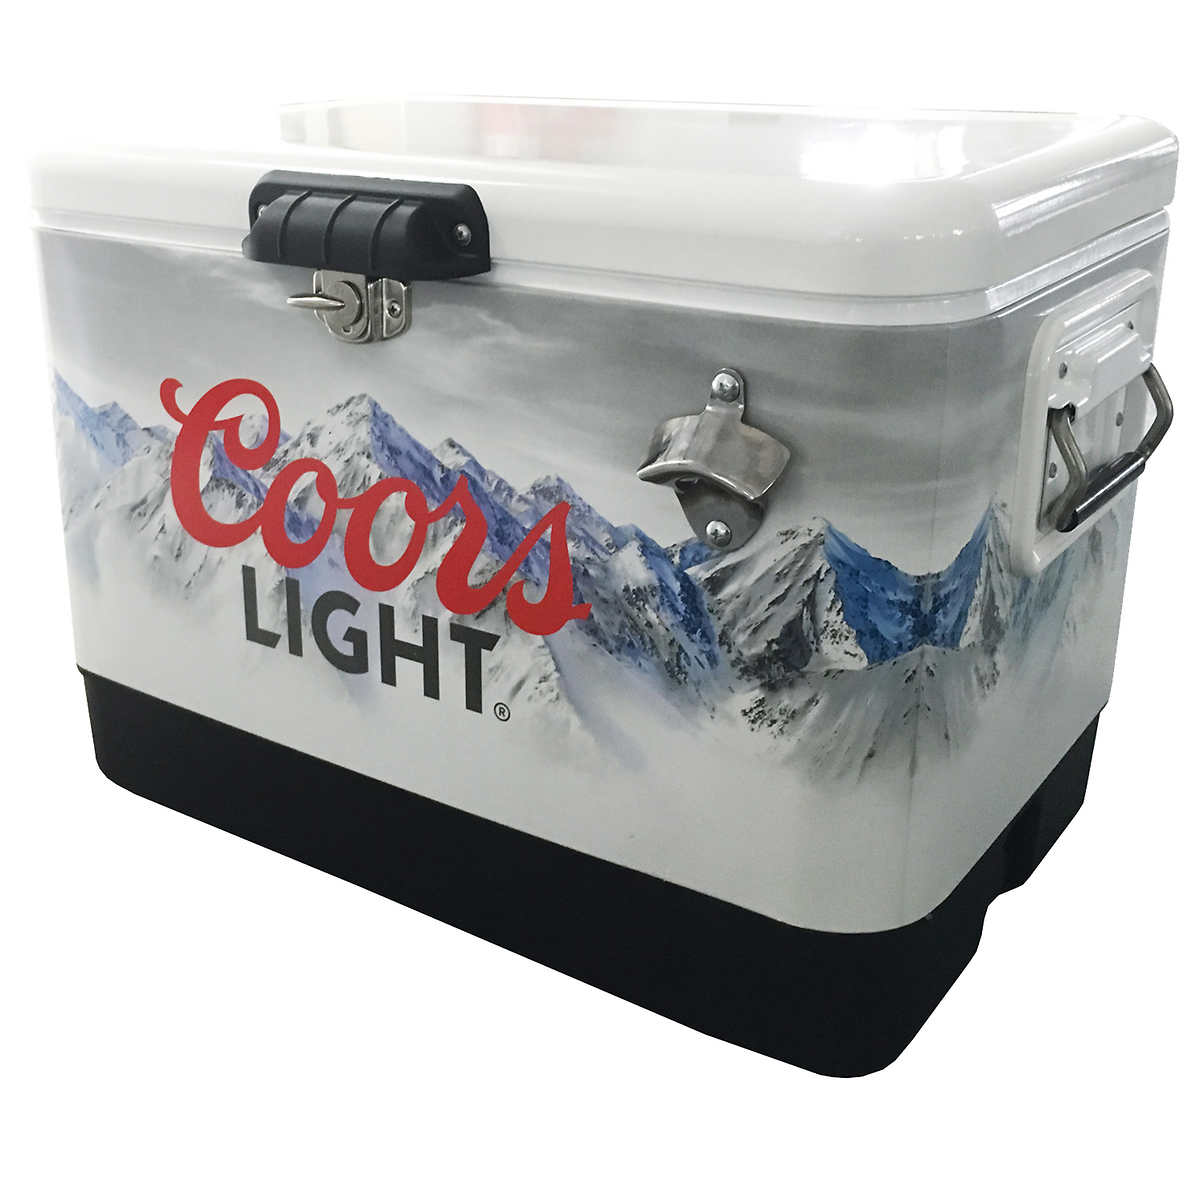 Stainless Steel Ice Chest Cooler Costco, Coors Light Fire Pit